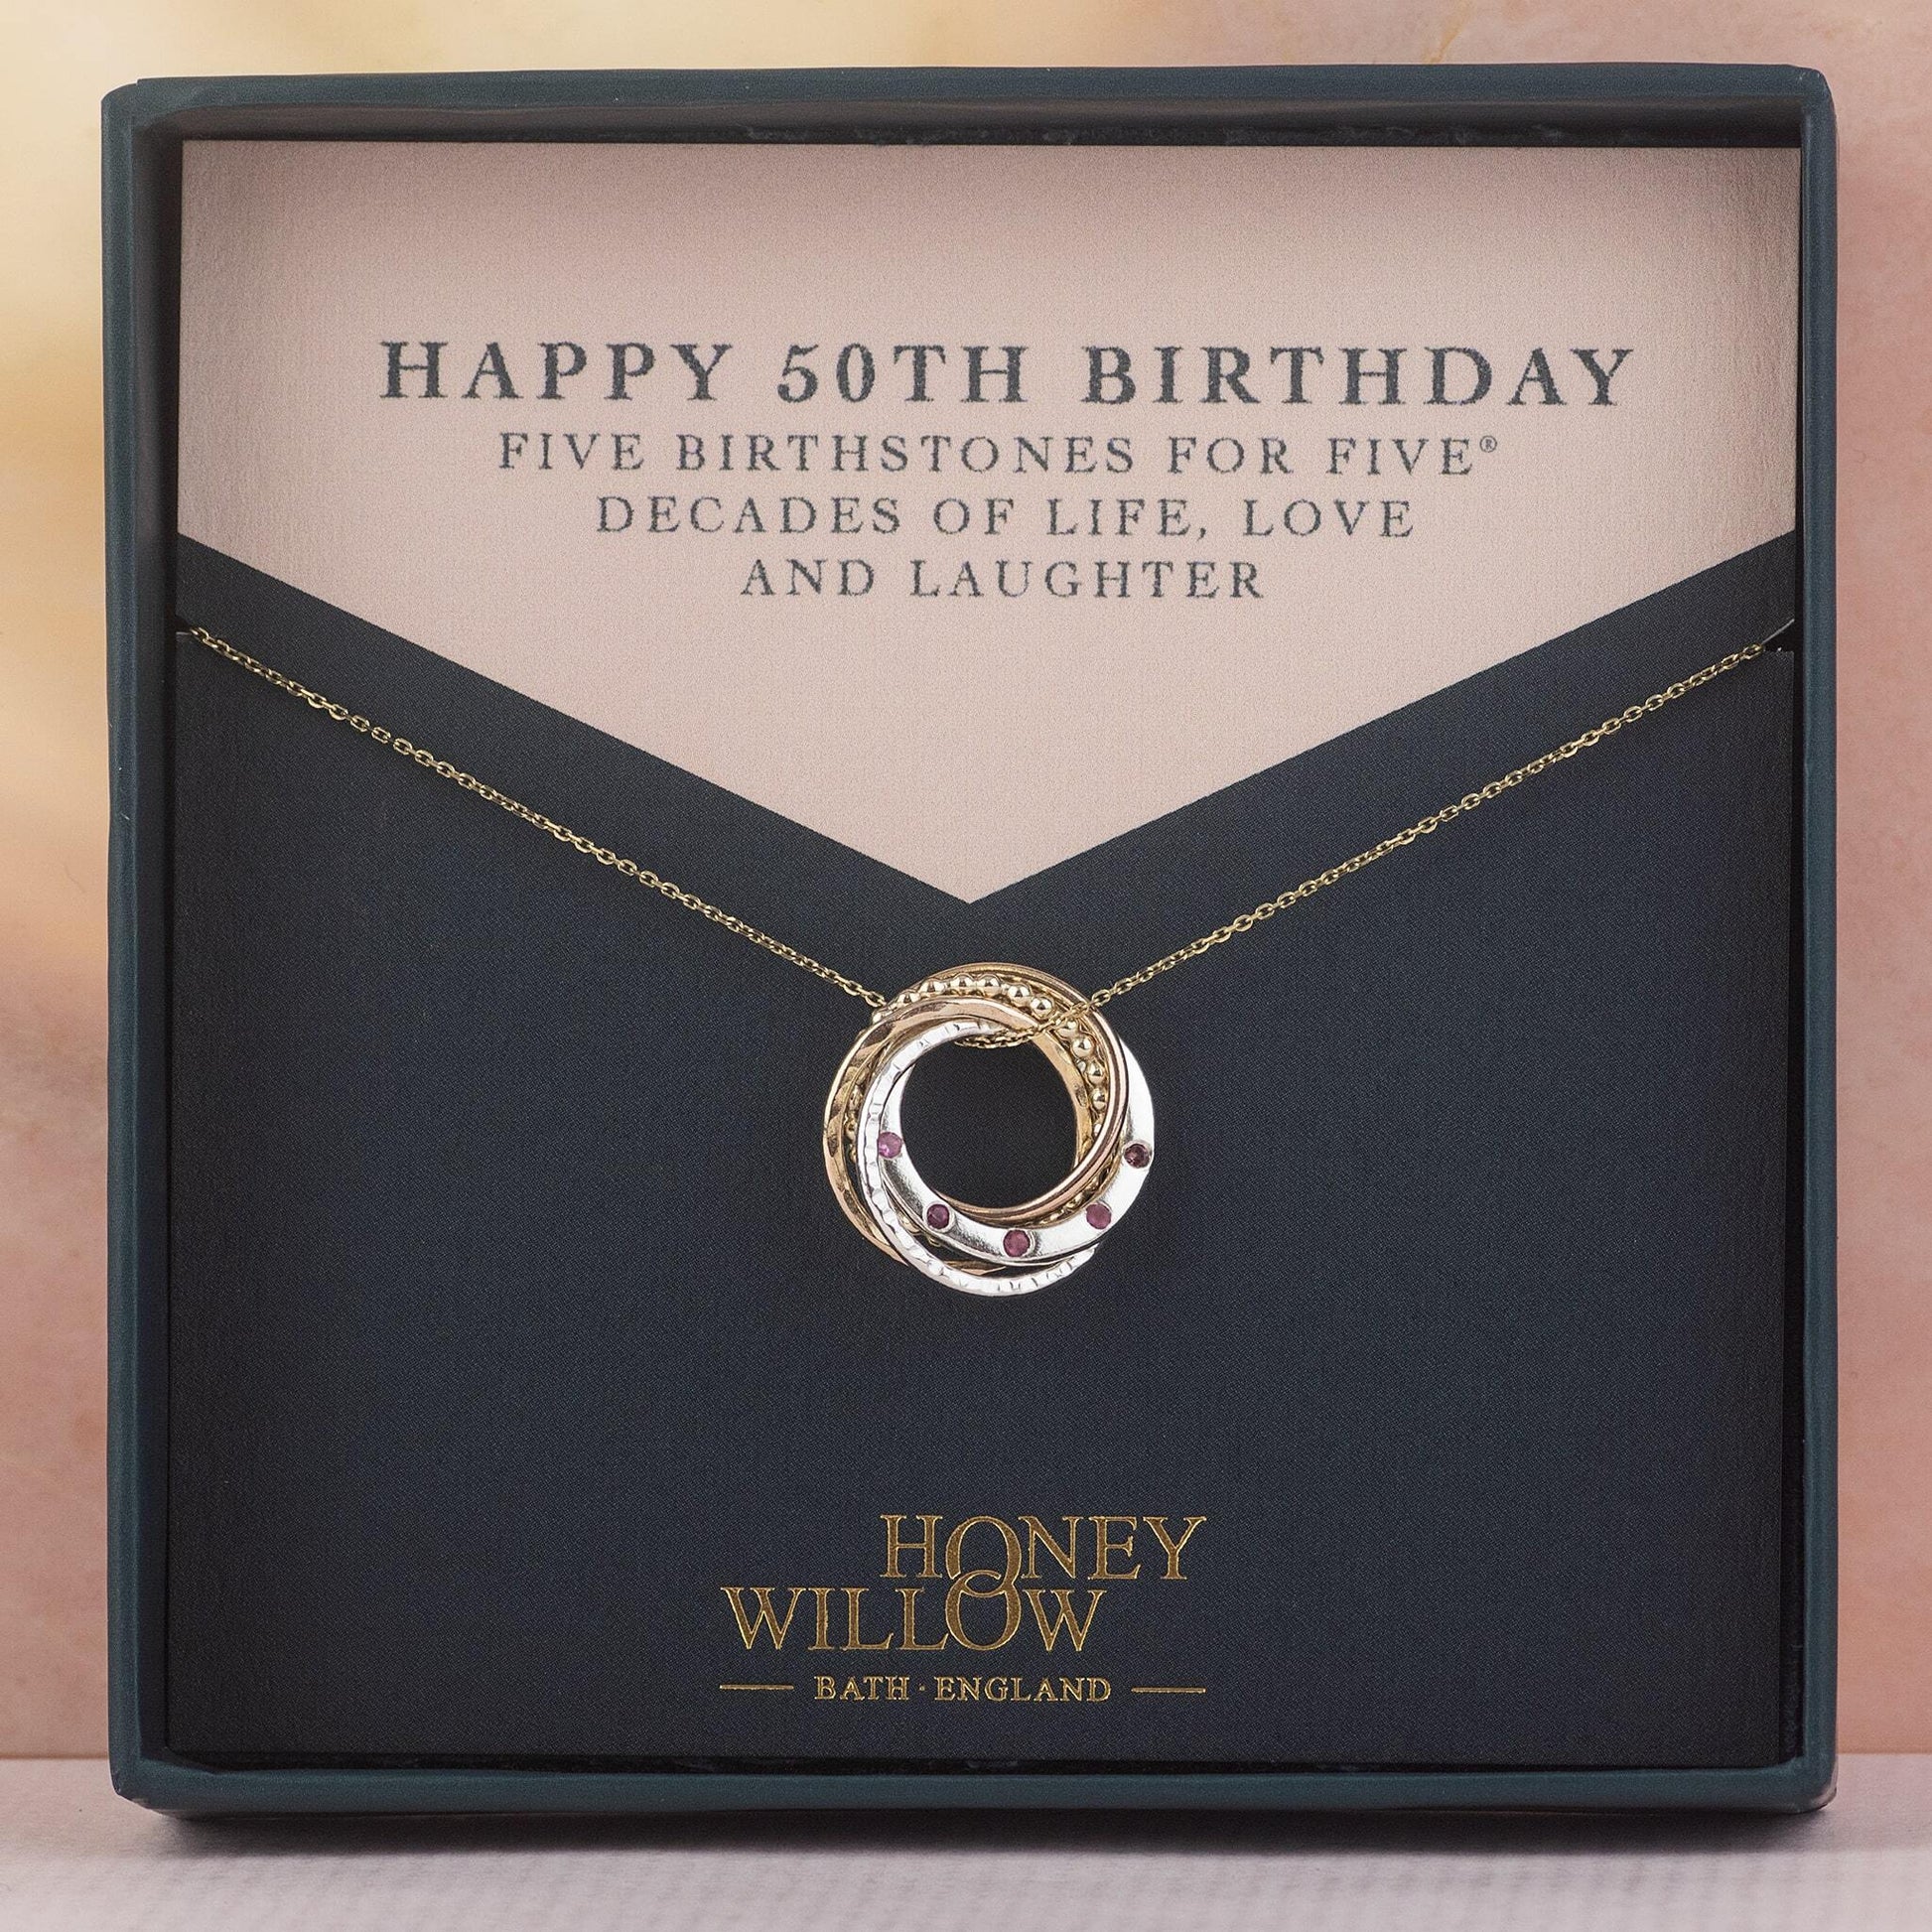 Recycled 9kt Gold and Silver 50th Birthday Necklace - 5 Birthstones for 5® Decades